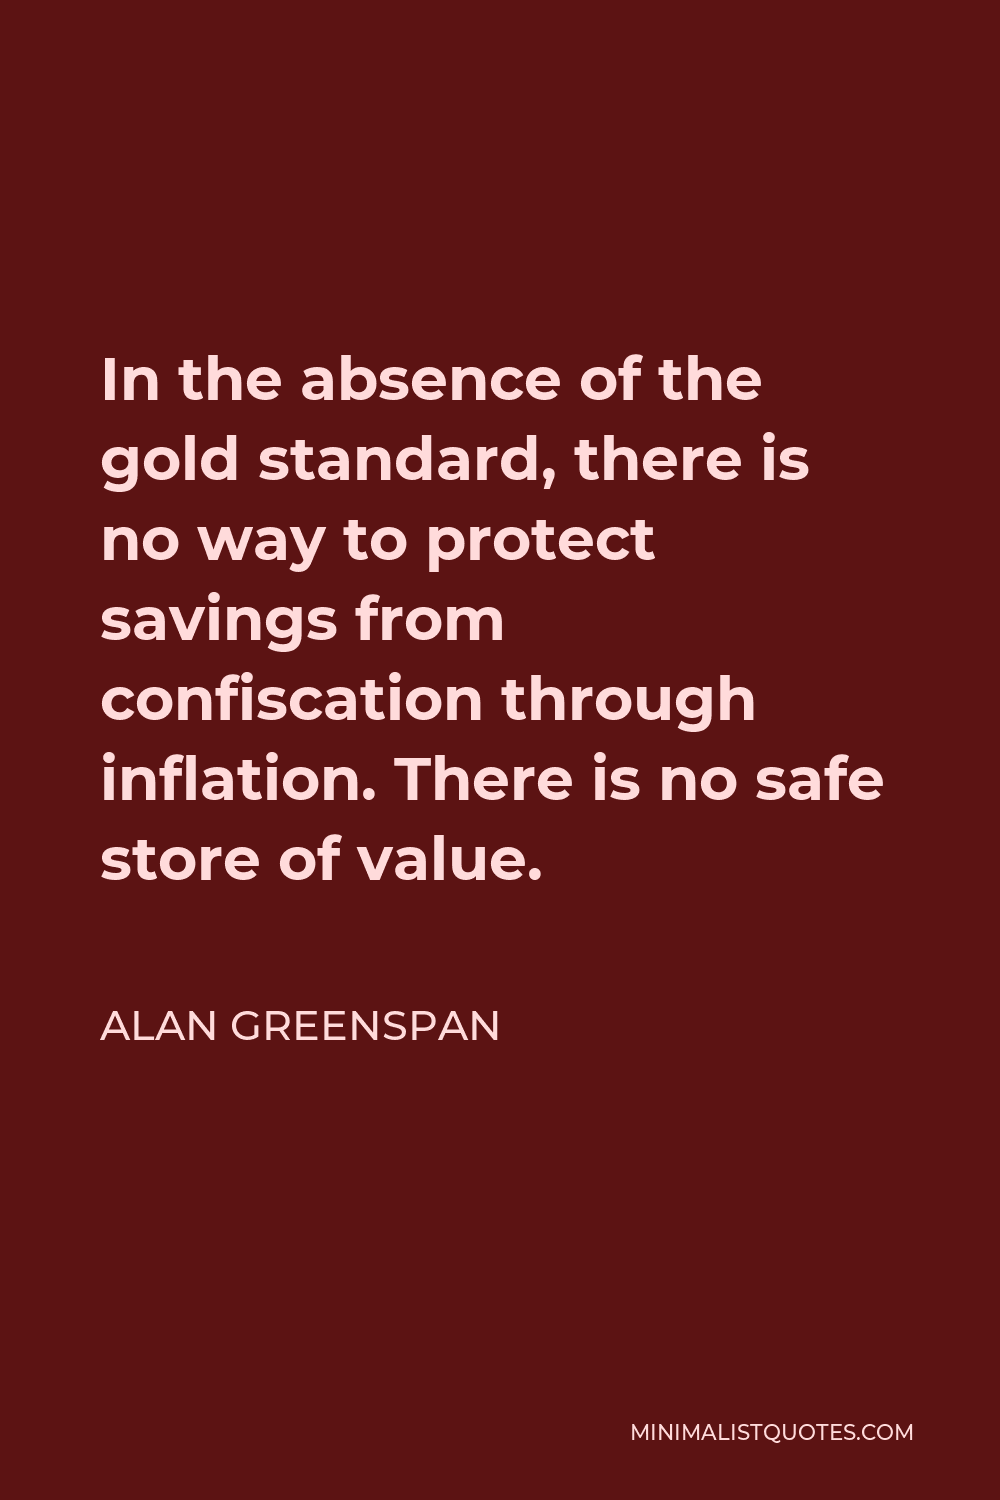 Alan Greenspan Quote - In the absence of the gold standard, there is no way to protect savings from confiscation through inflation. There is no safe store of value.